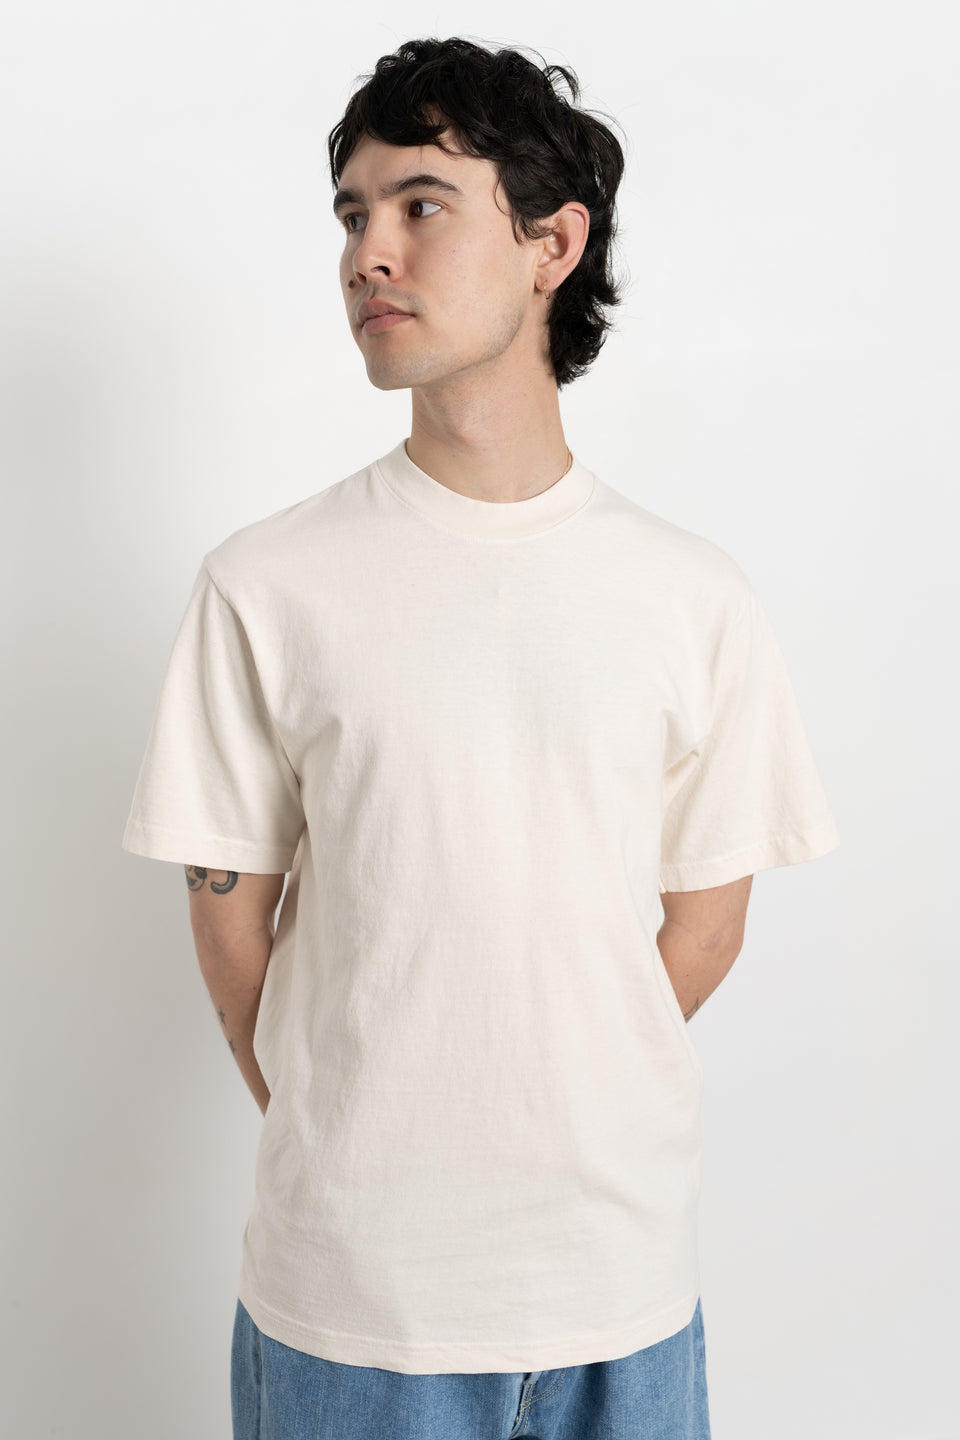 Garment Dyed US Cotton Tee Écru Men's Made in USA Calculus Online